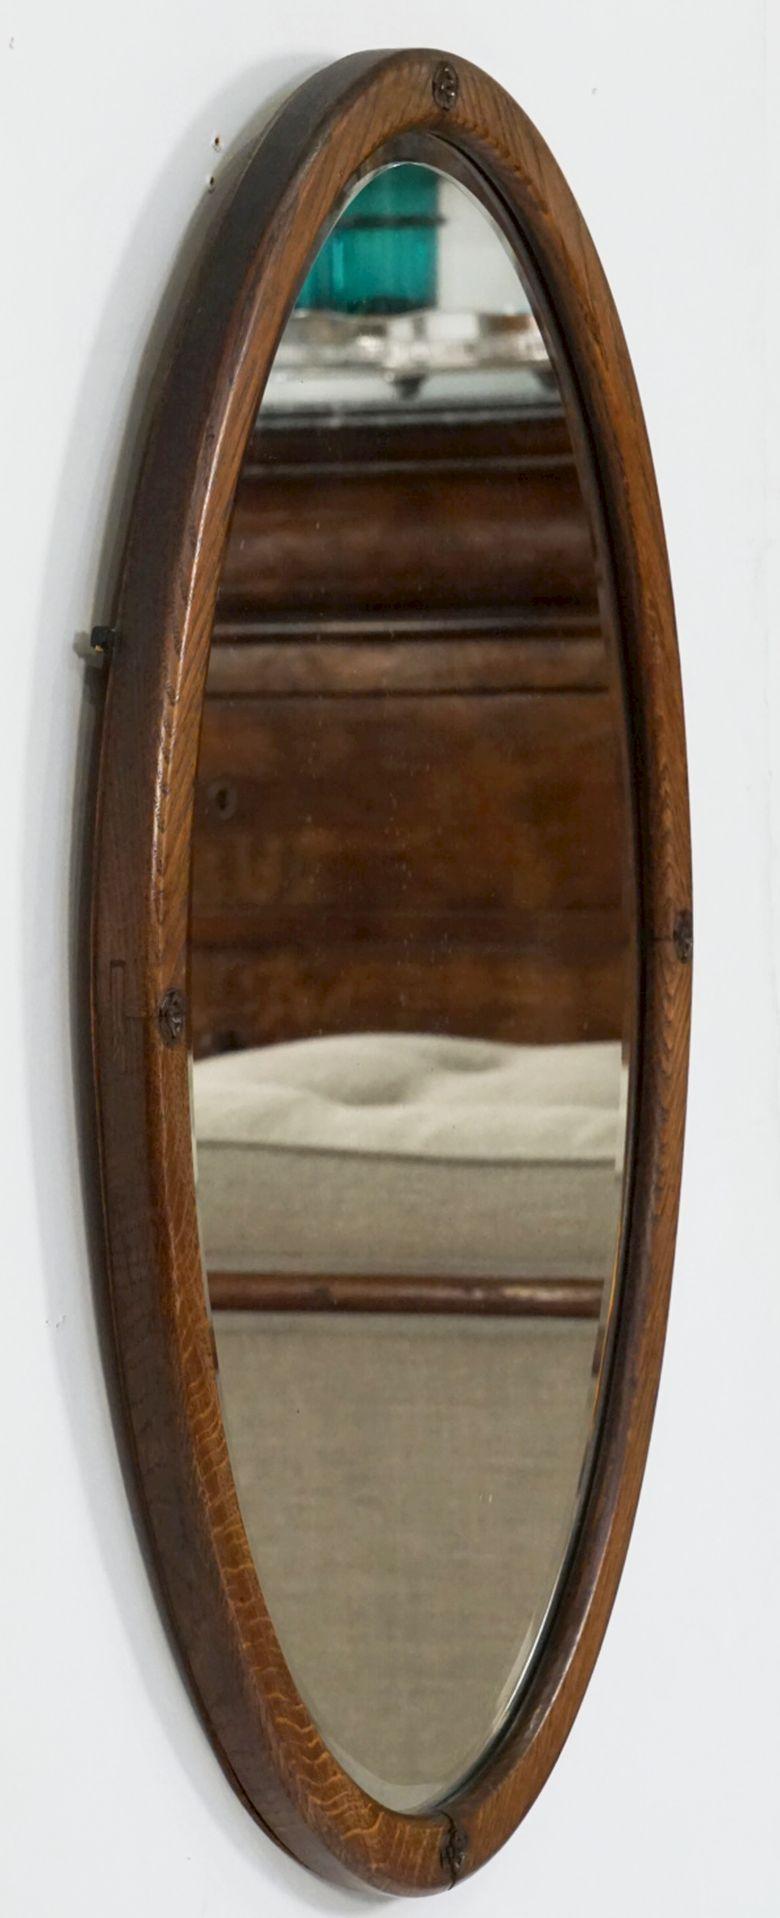 A fine English oval parlour wall mirror from the Edwardian era, with a handsome oak frame inset with a beveled mirror.

Can be displayed vertically or horizontally.

Dimensions: H 27 3/4 inches x W 18 inches x D 1 inch.